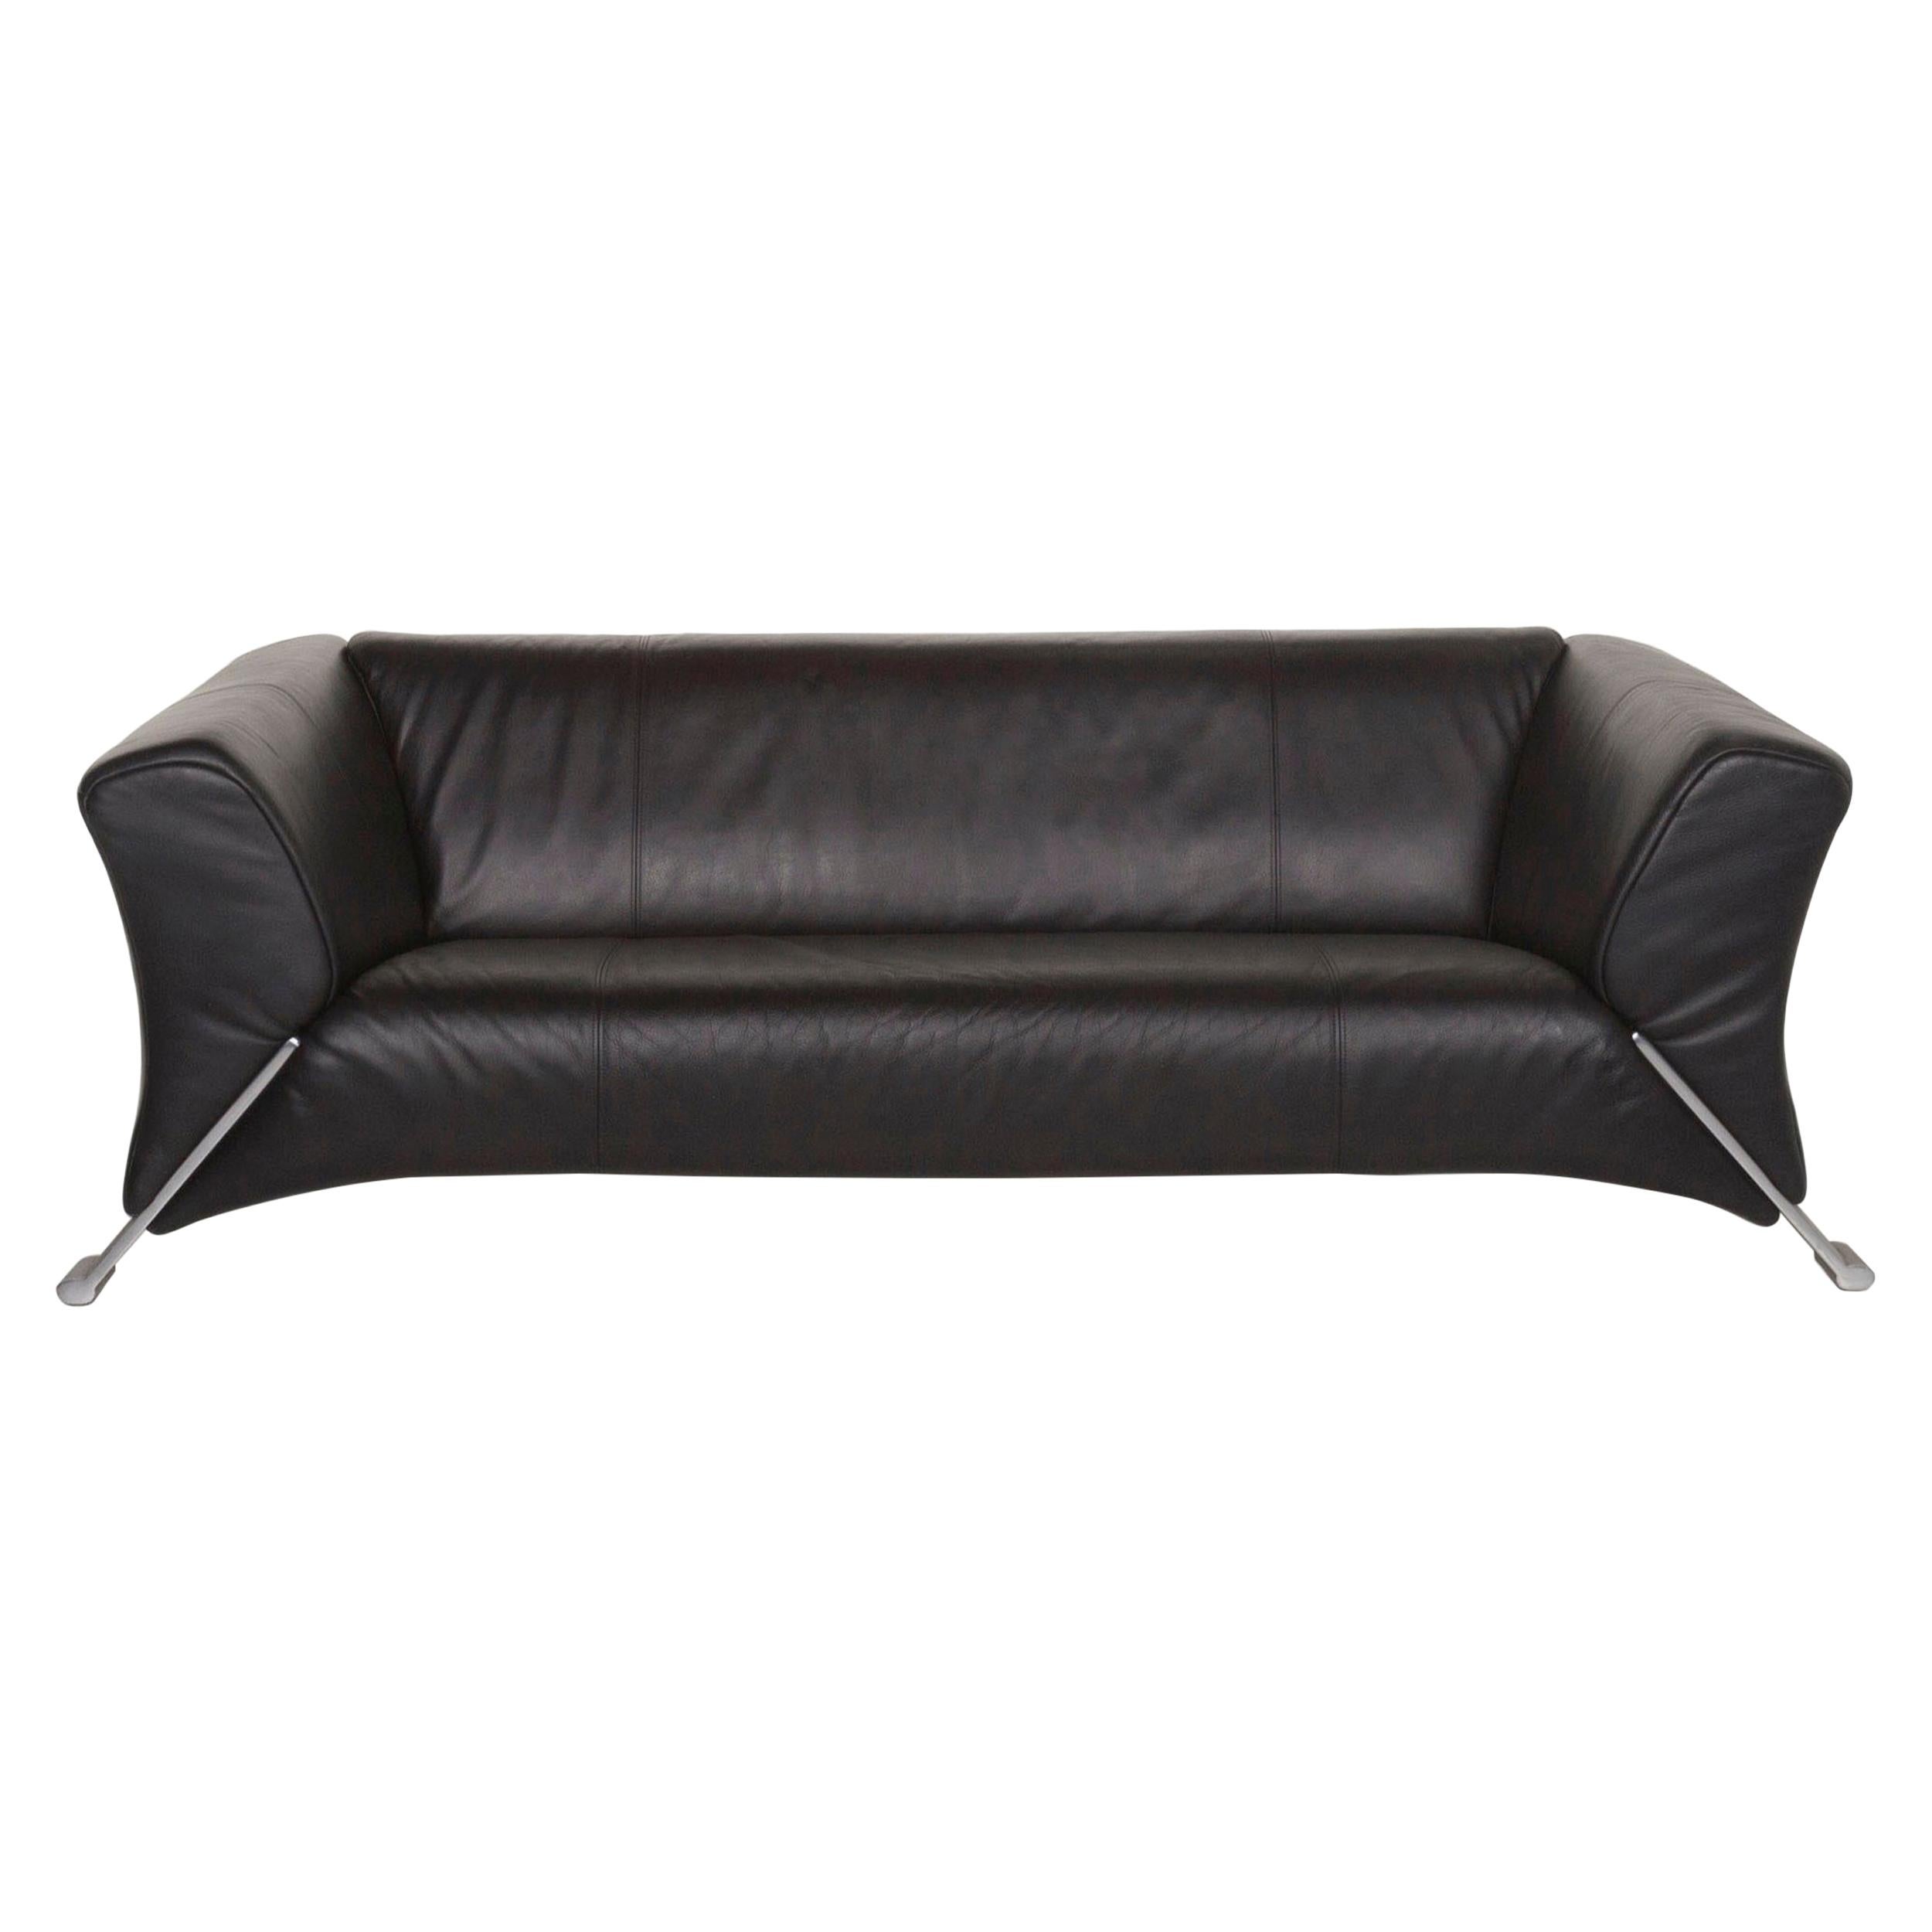 Rolf Benz 322 Leather Sofa Black Three-Seat For Sale